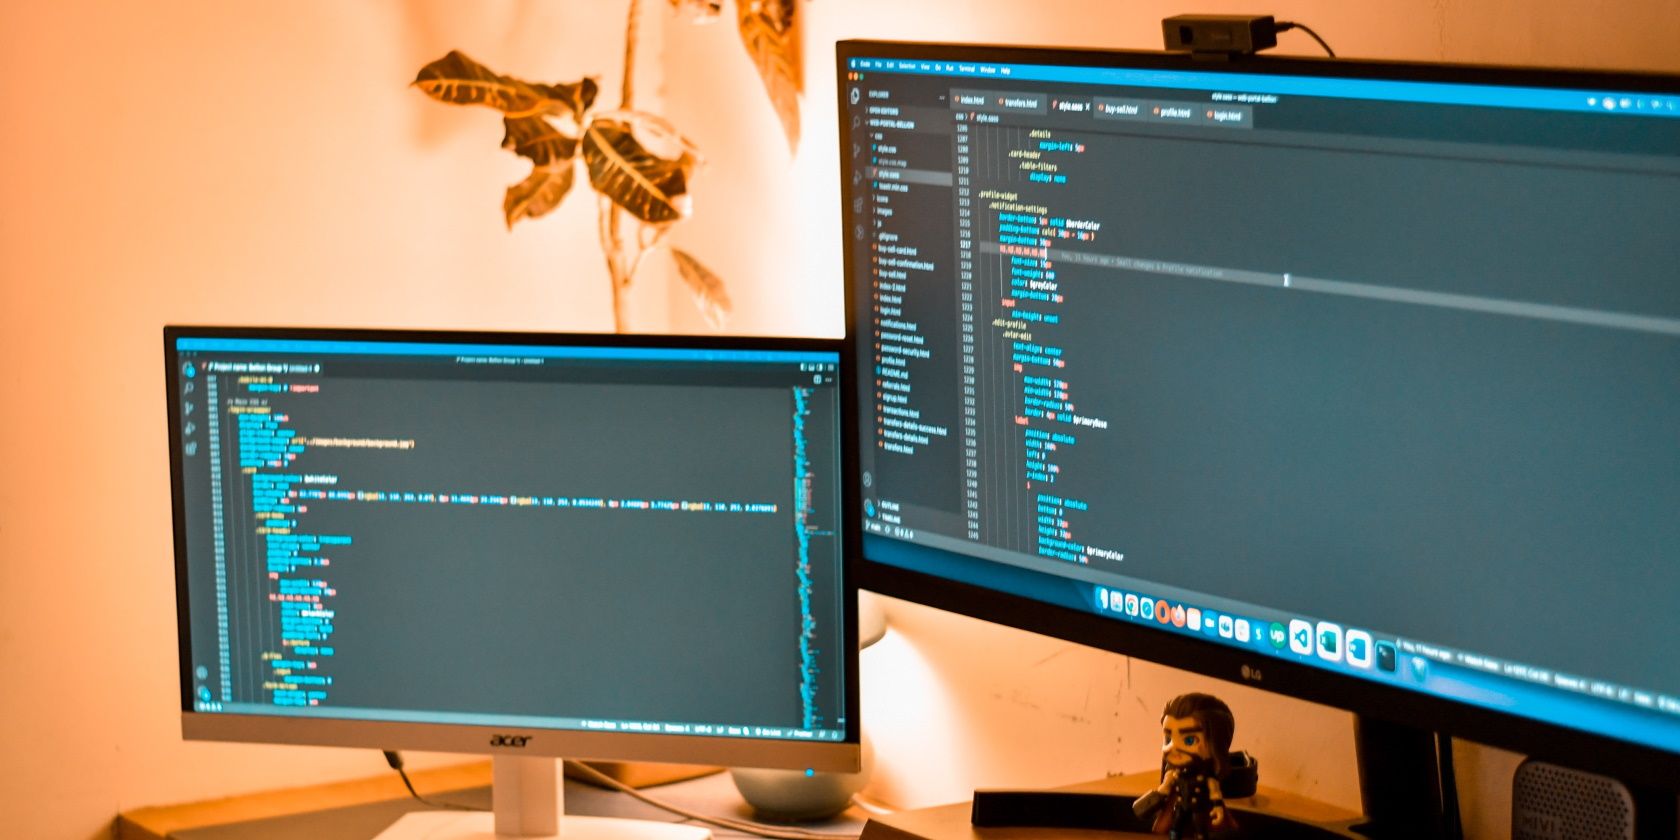 Two monitors side by side, one large and one small, each displaying code in a text editor